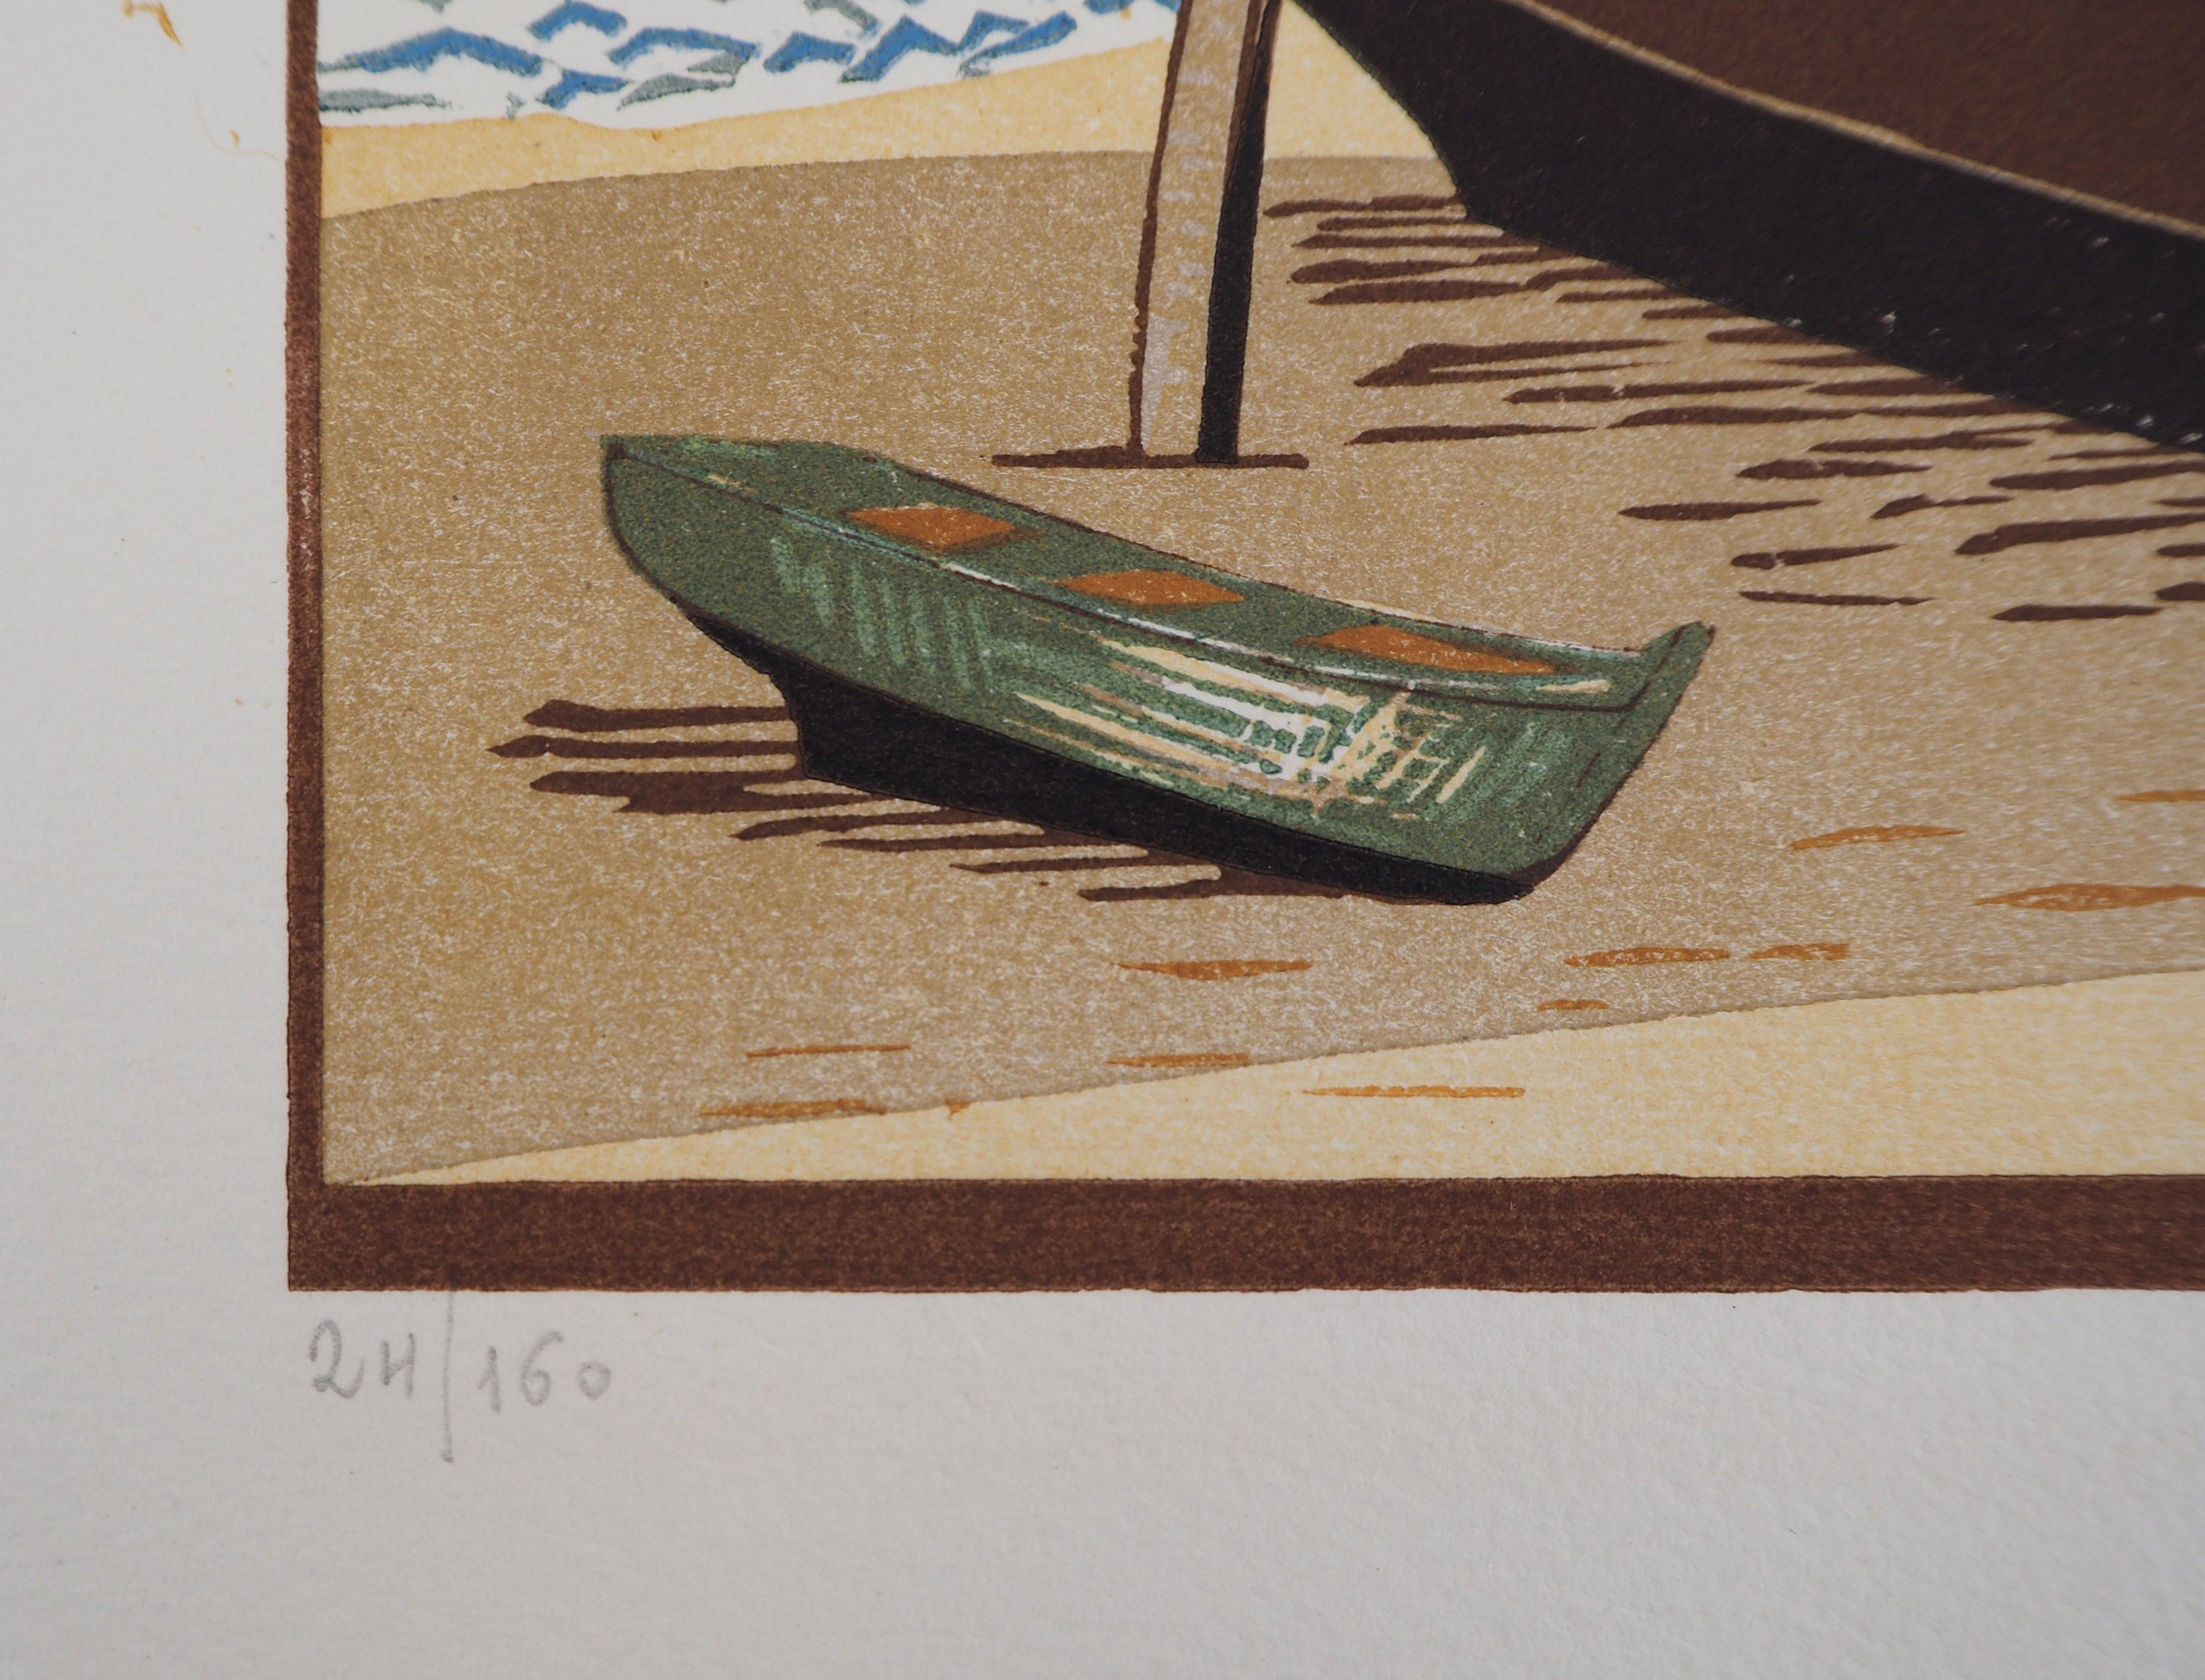 Lobster Boat On The Shore - Original Wooodcut, Handsigned - Modern Print by François-Louis Schmied